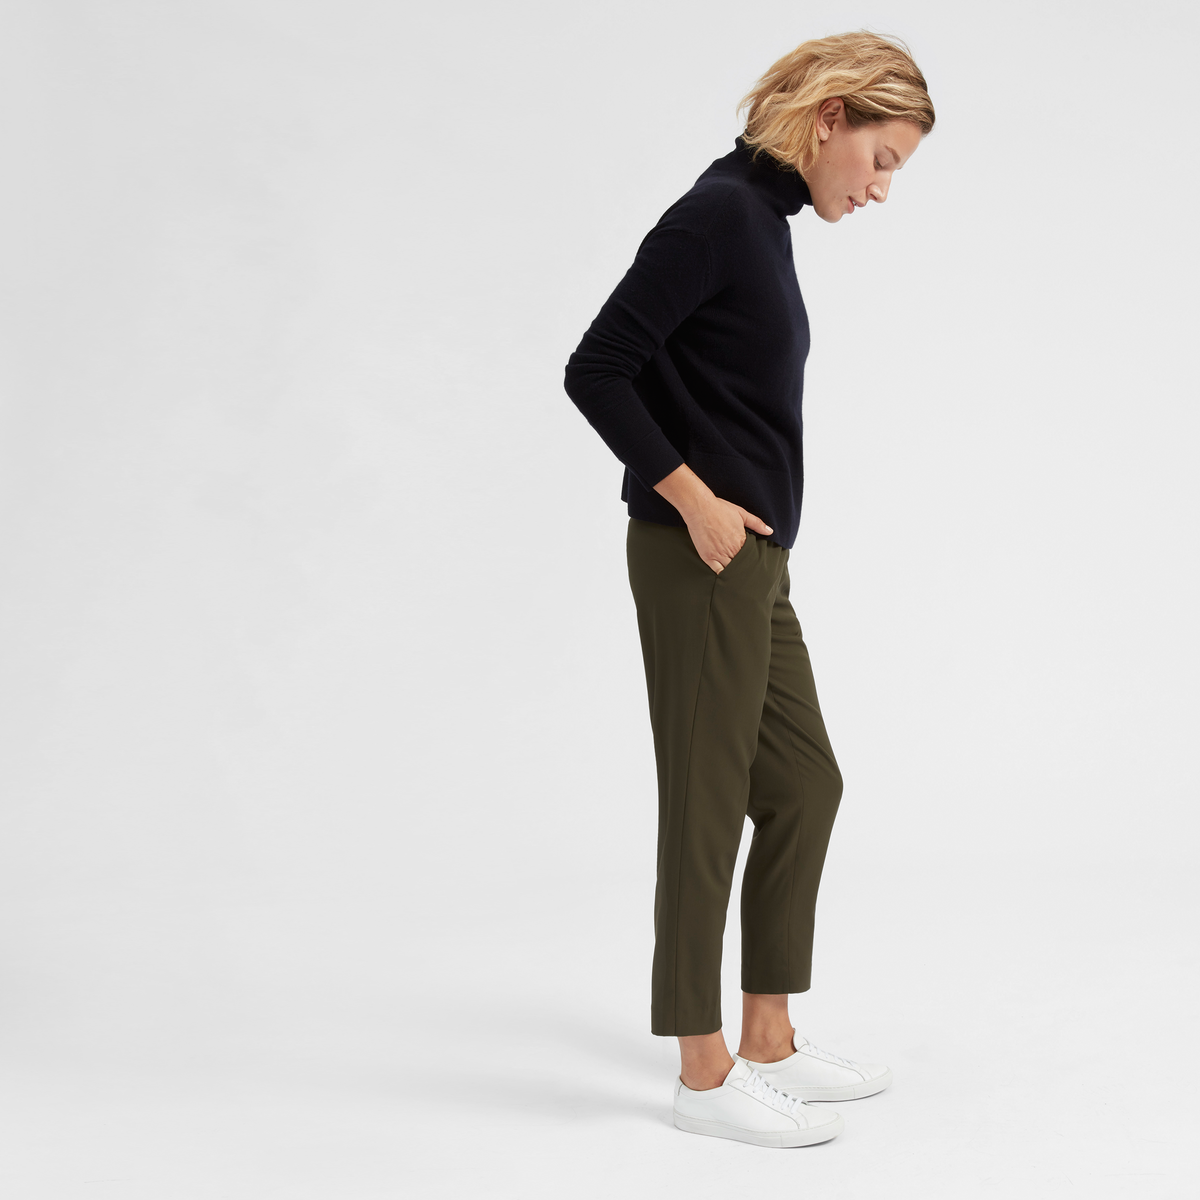 Fitting Room Review: The Everlane GoWeave Easy Pant - Welcome Objects